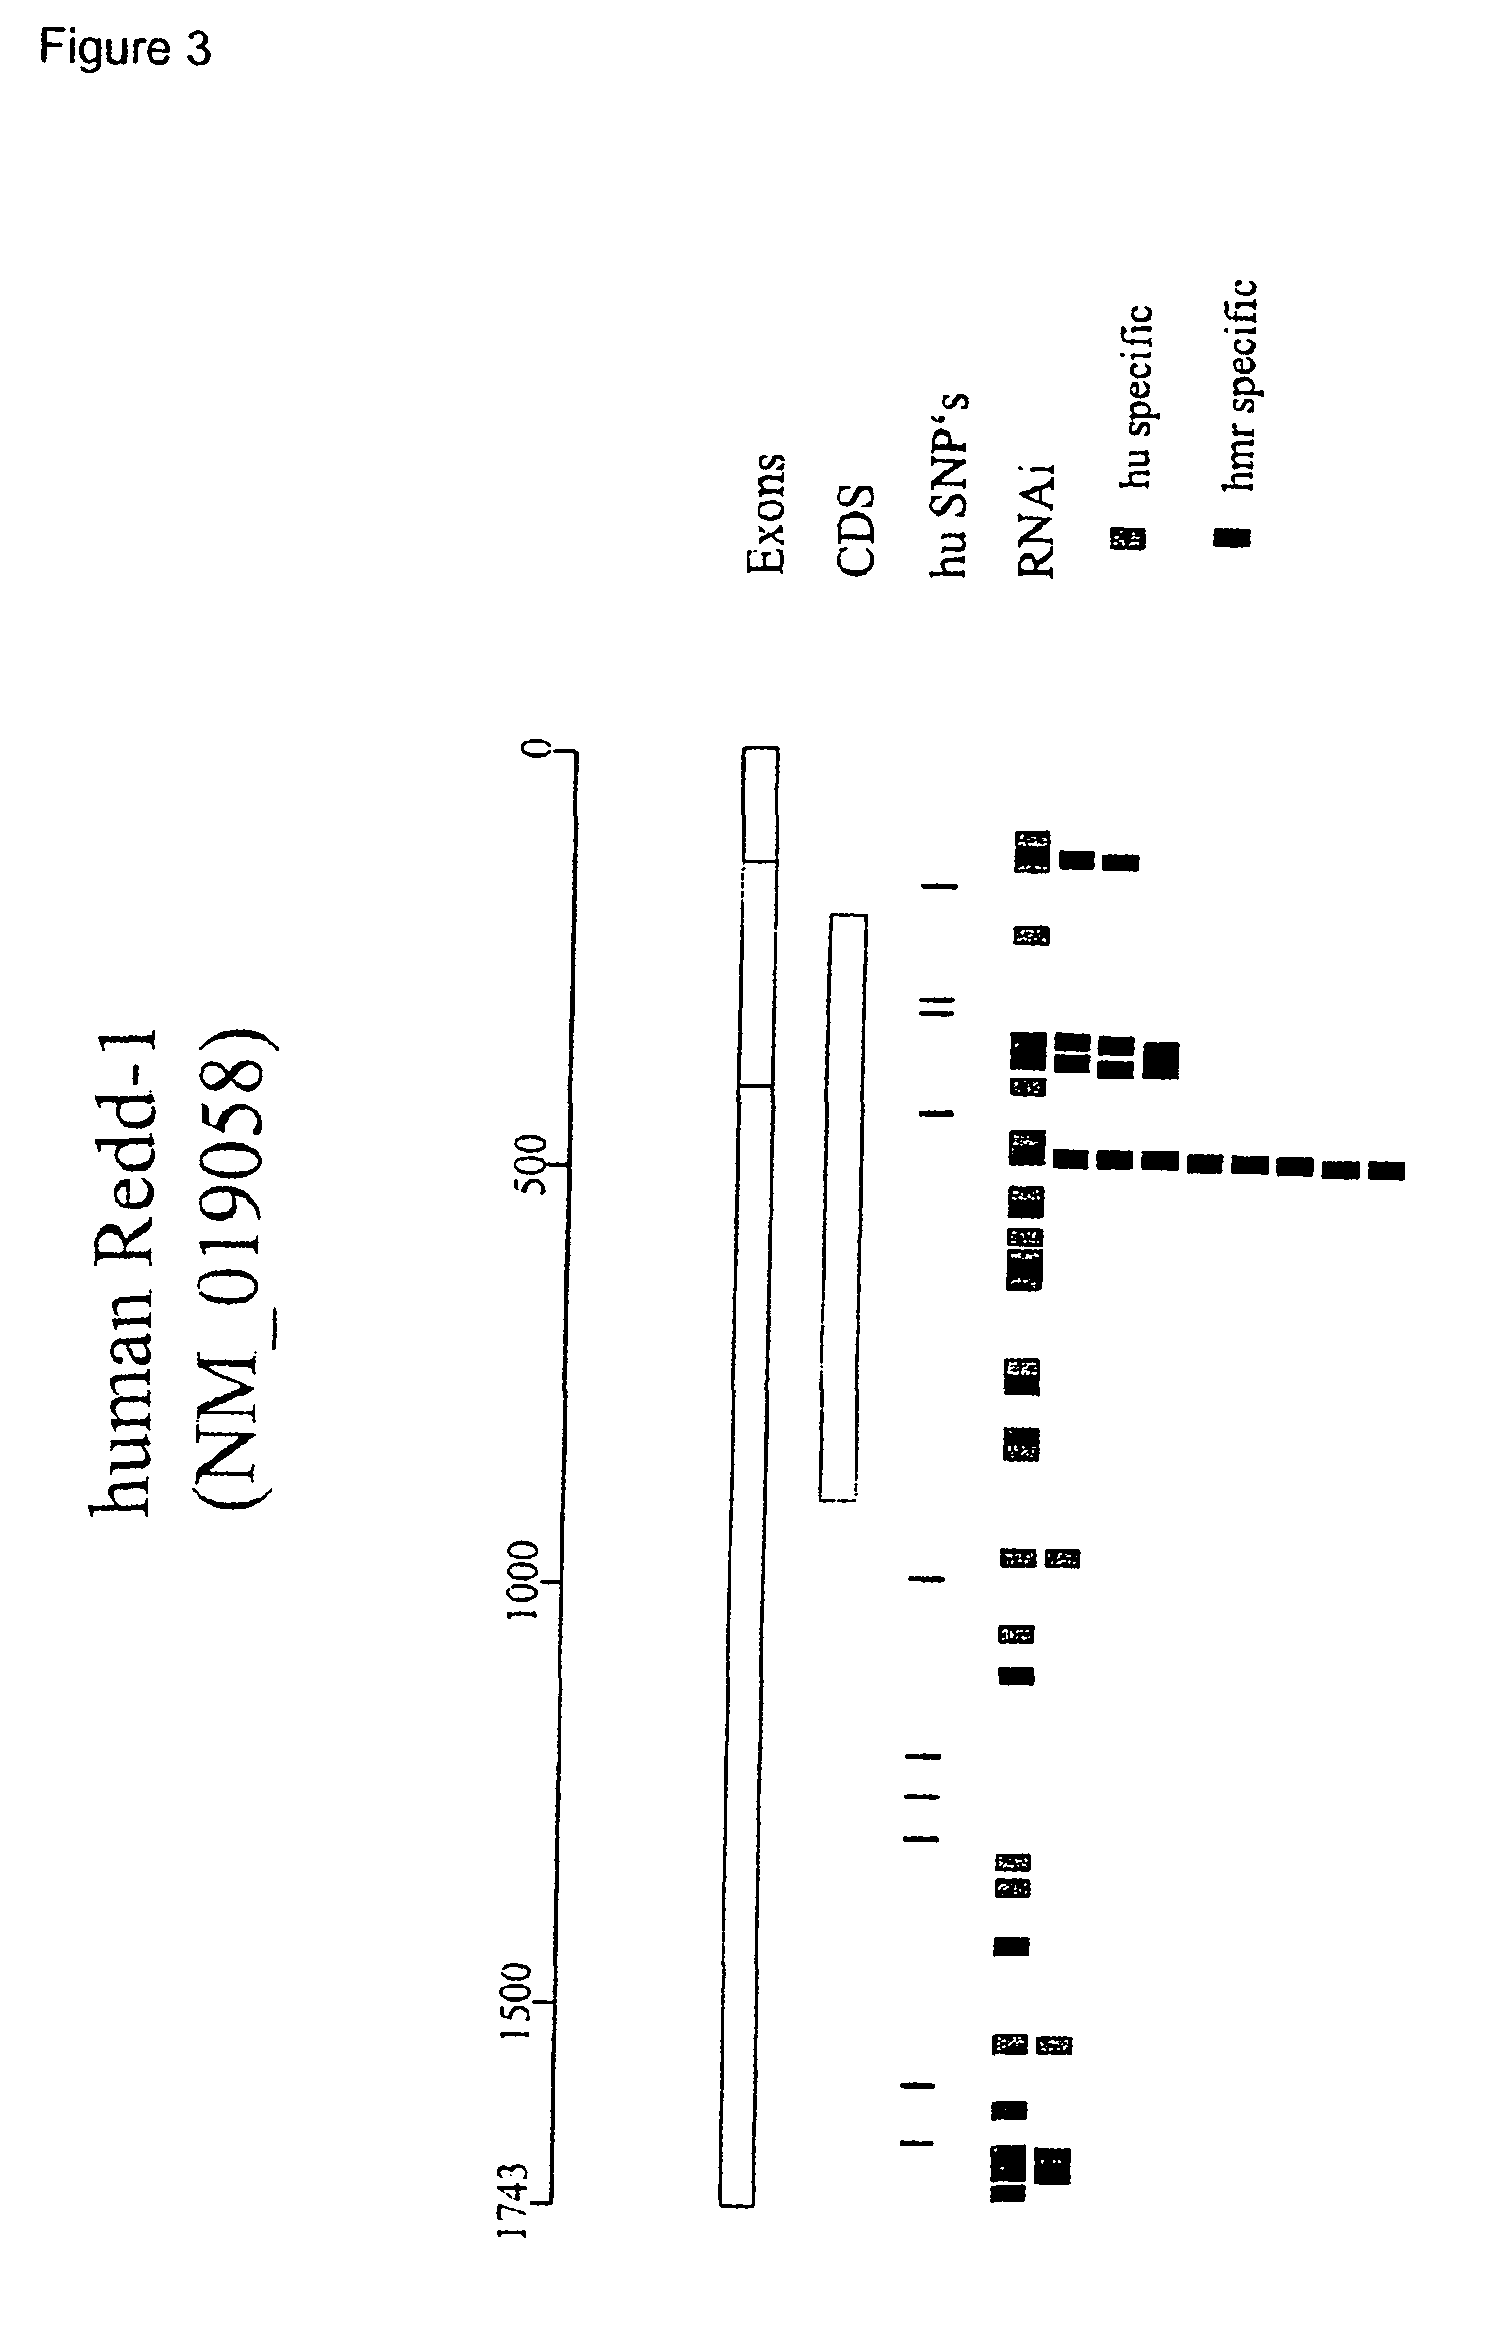 Therapeutic uses of inhibitors of RTP801